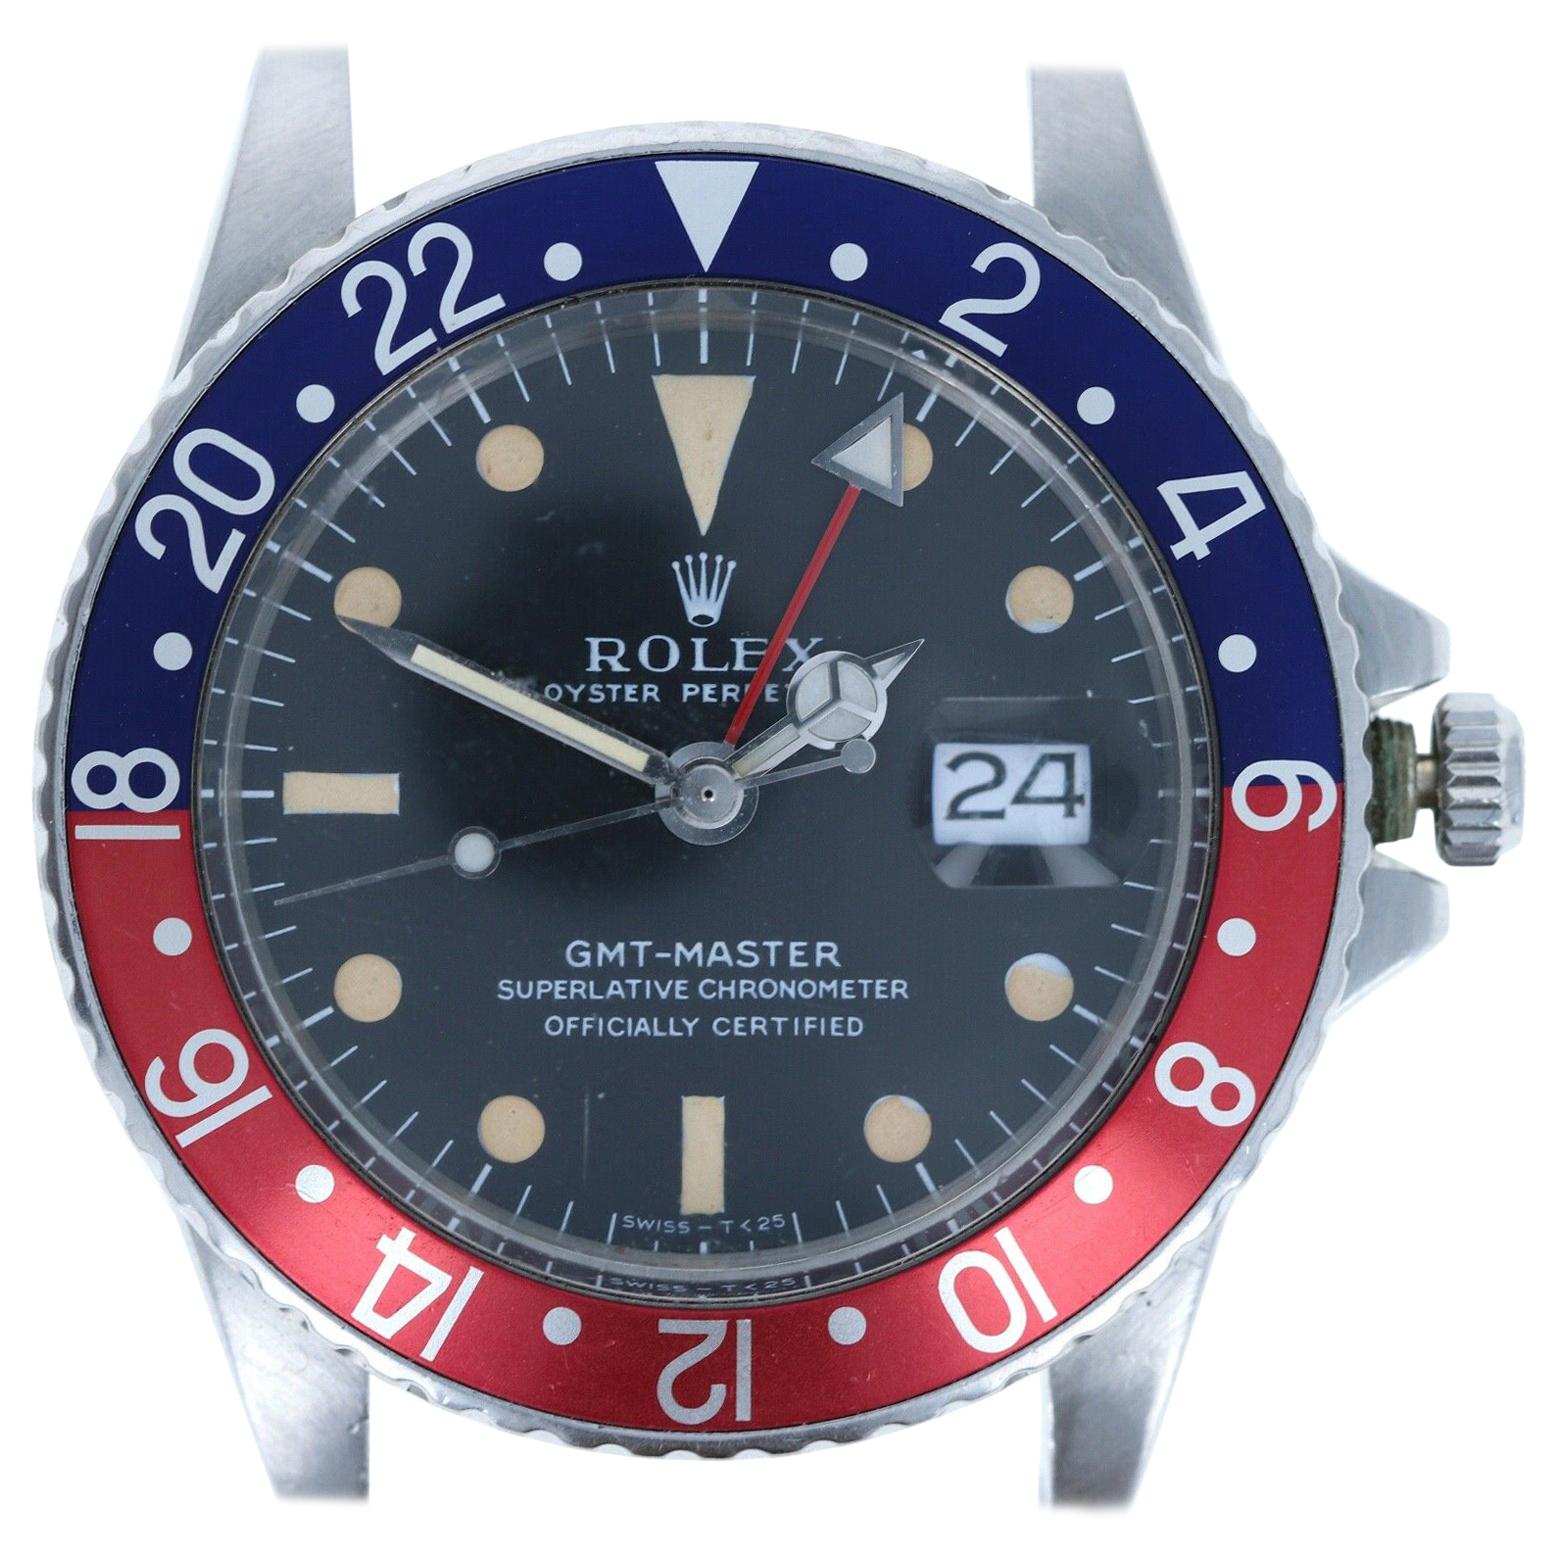 Rolex Stainless Pepsi 1675 Oyster Perpetual GMT-Master MK1 Long E Head Only